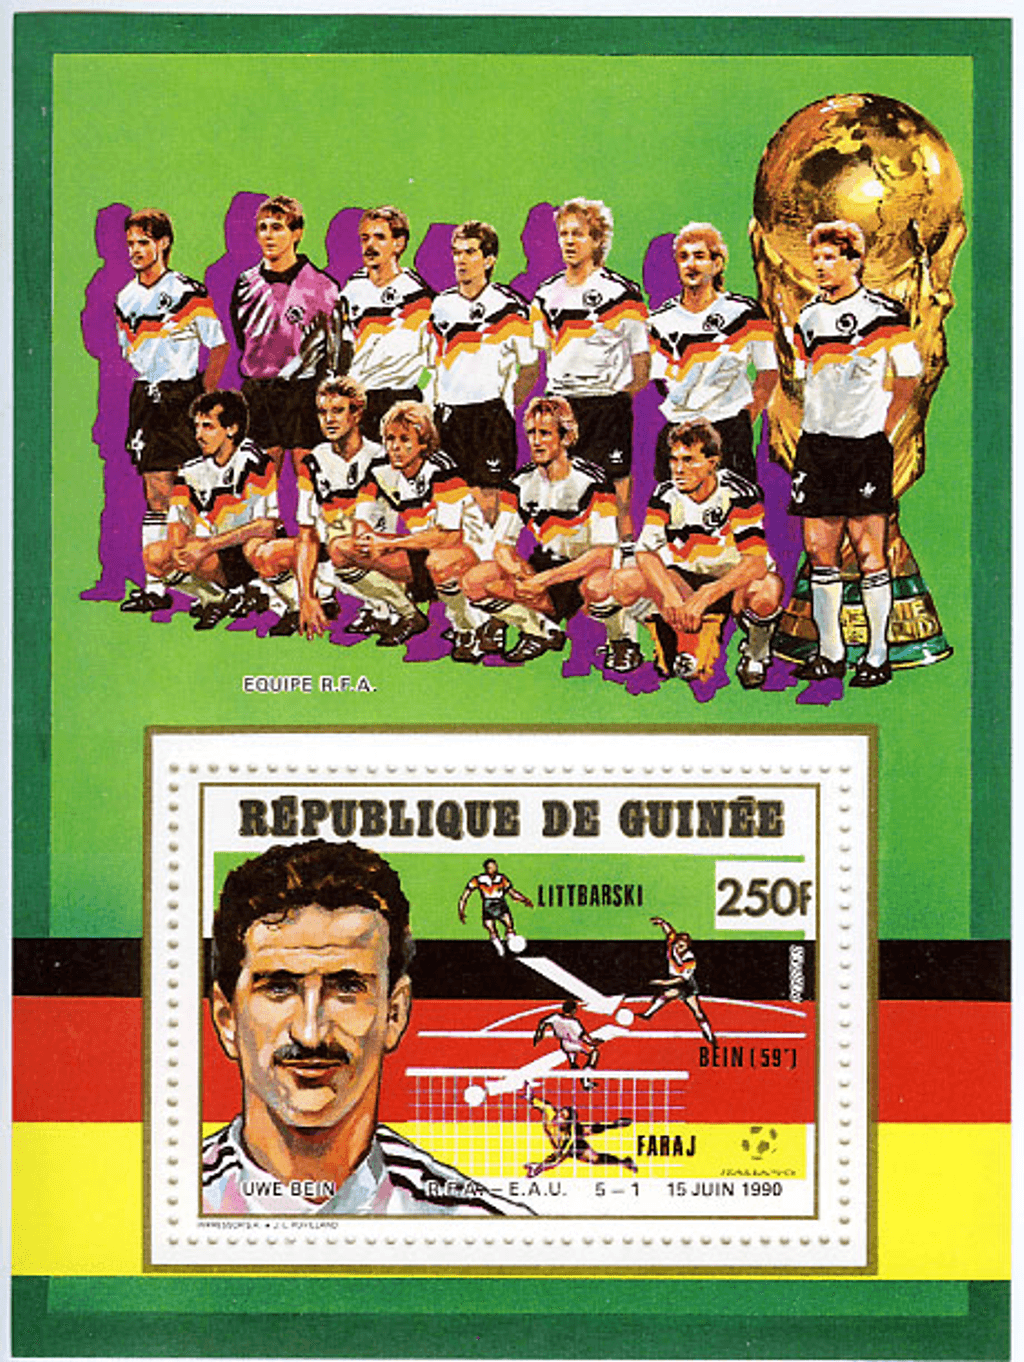 Football worldcup 90 / the winners